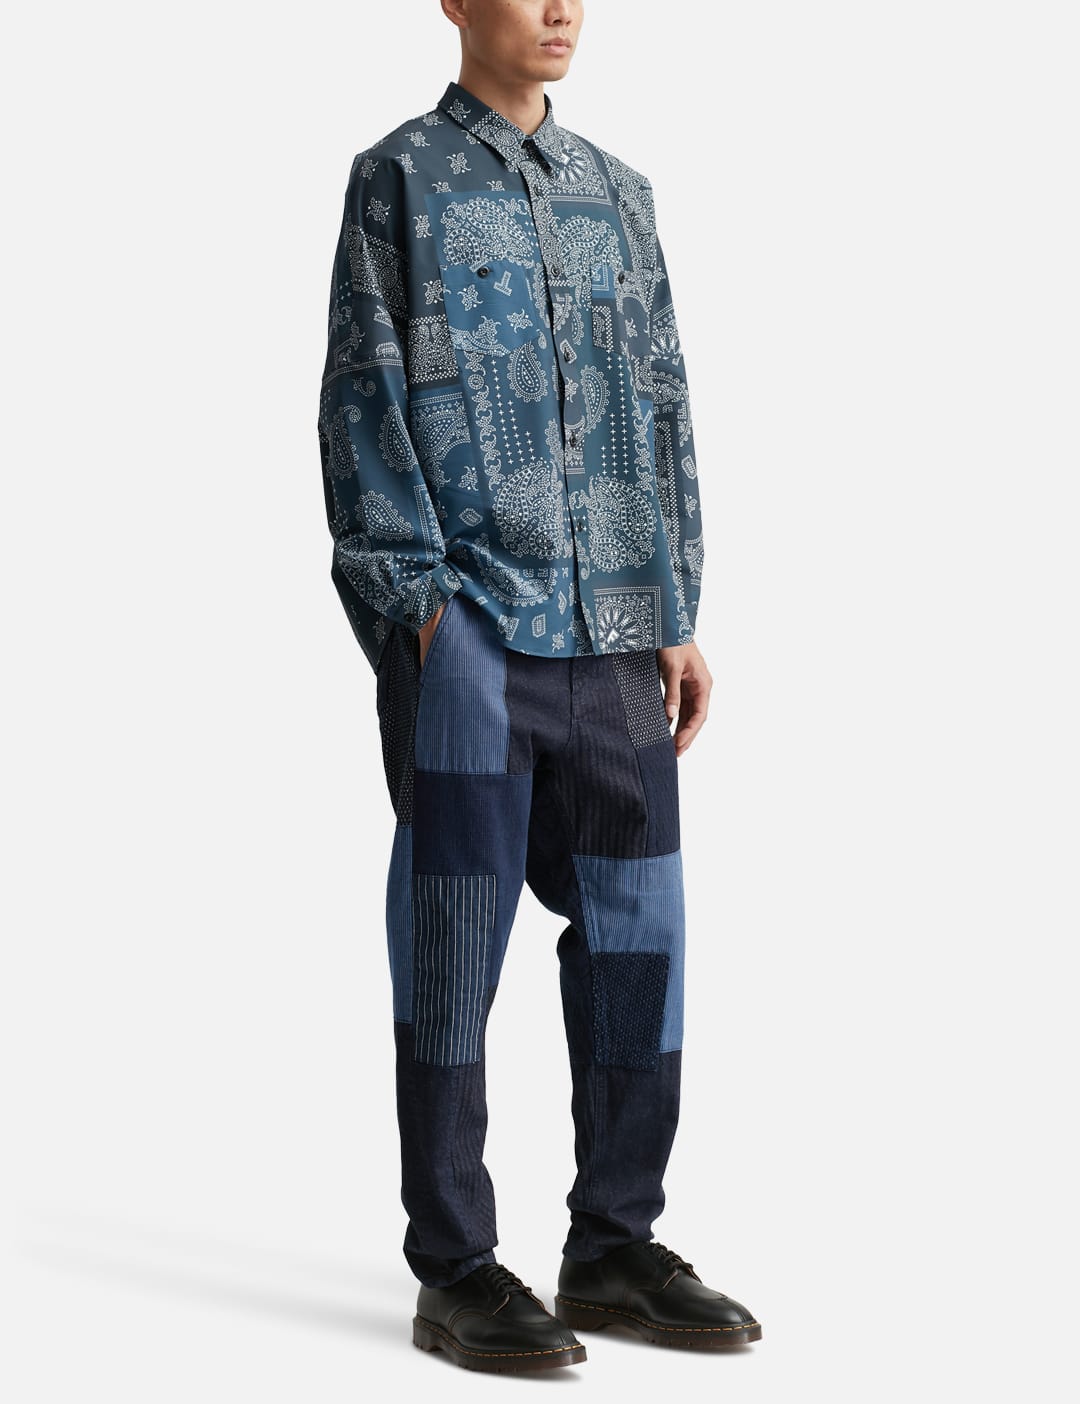 FDMTL - PRINTED PATCHWORK SHIRT | HBX - Globally Curated Fashion 